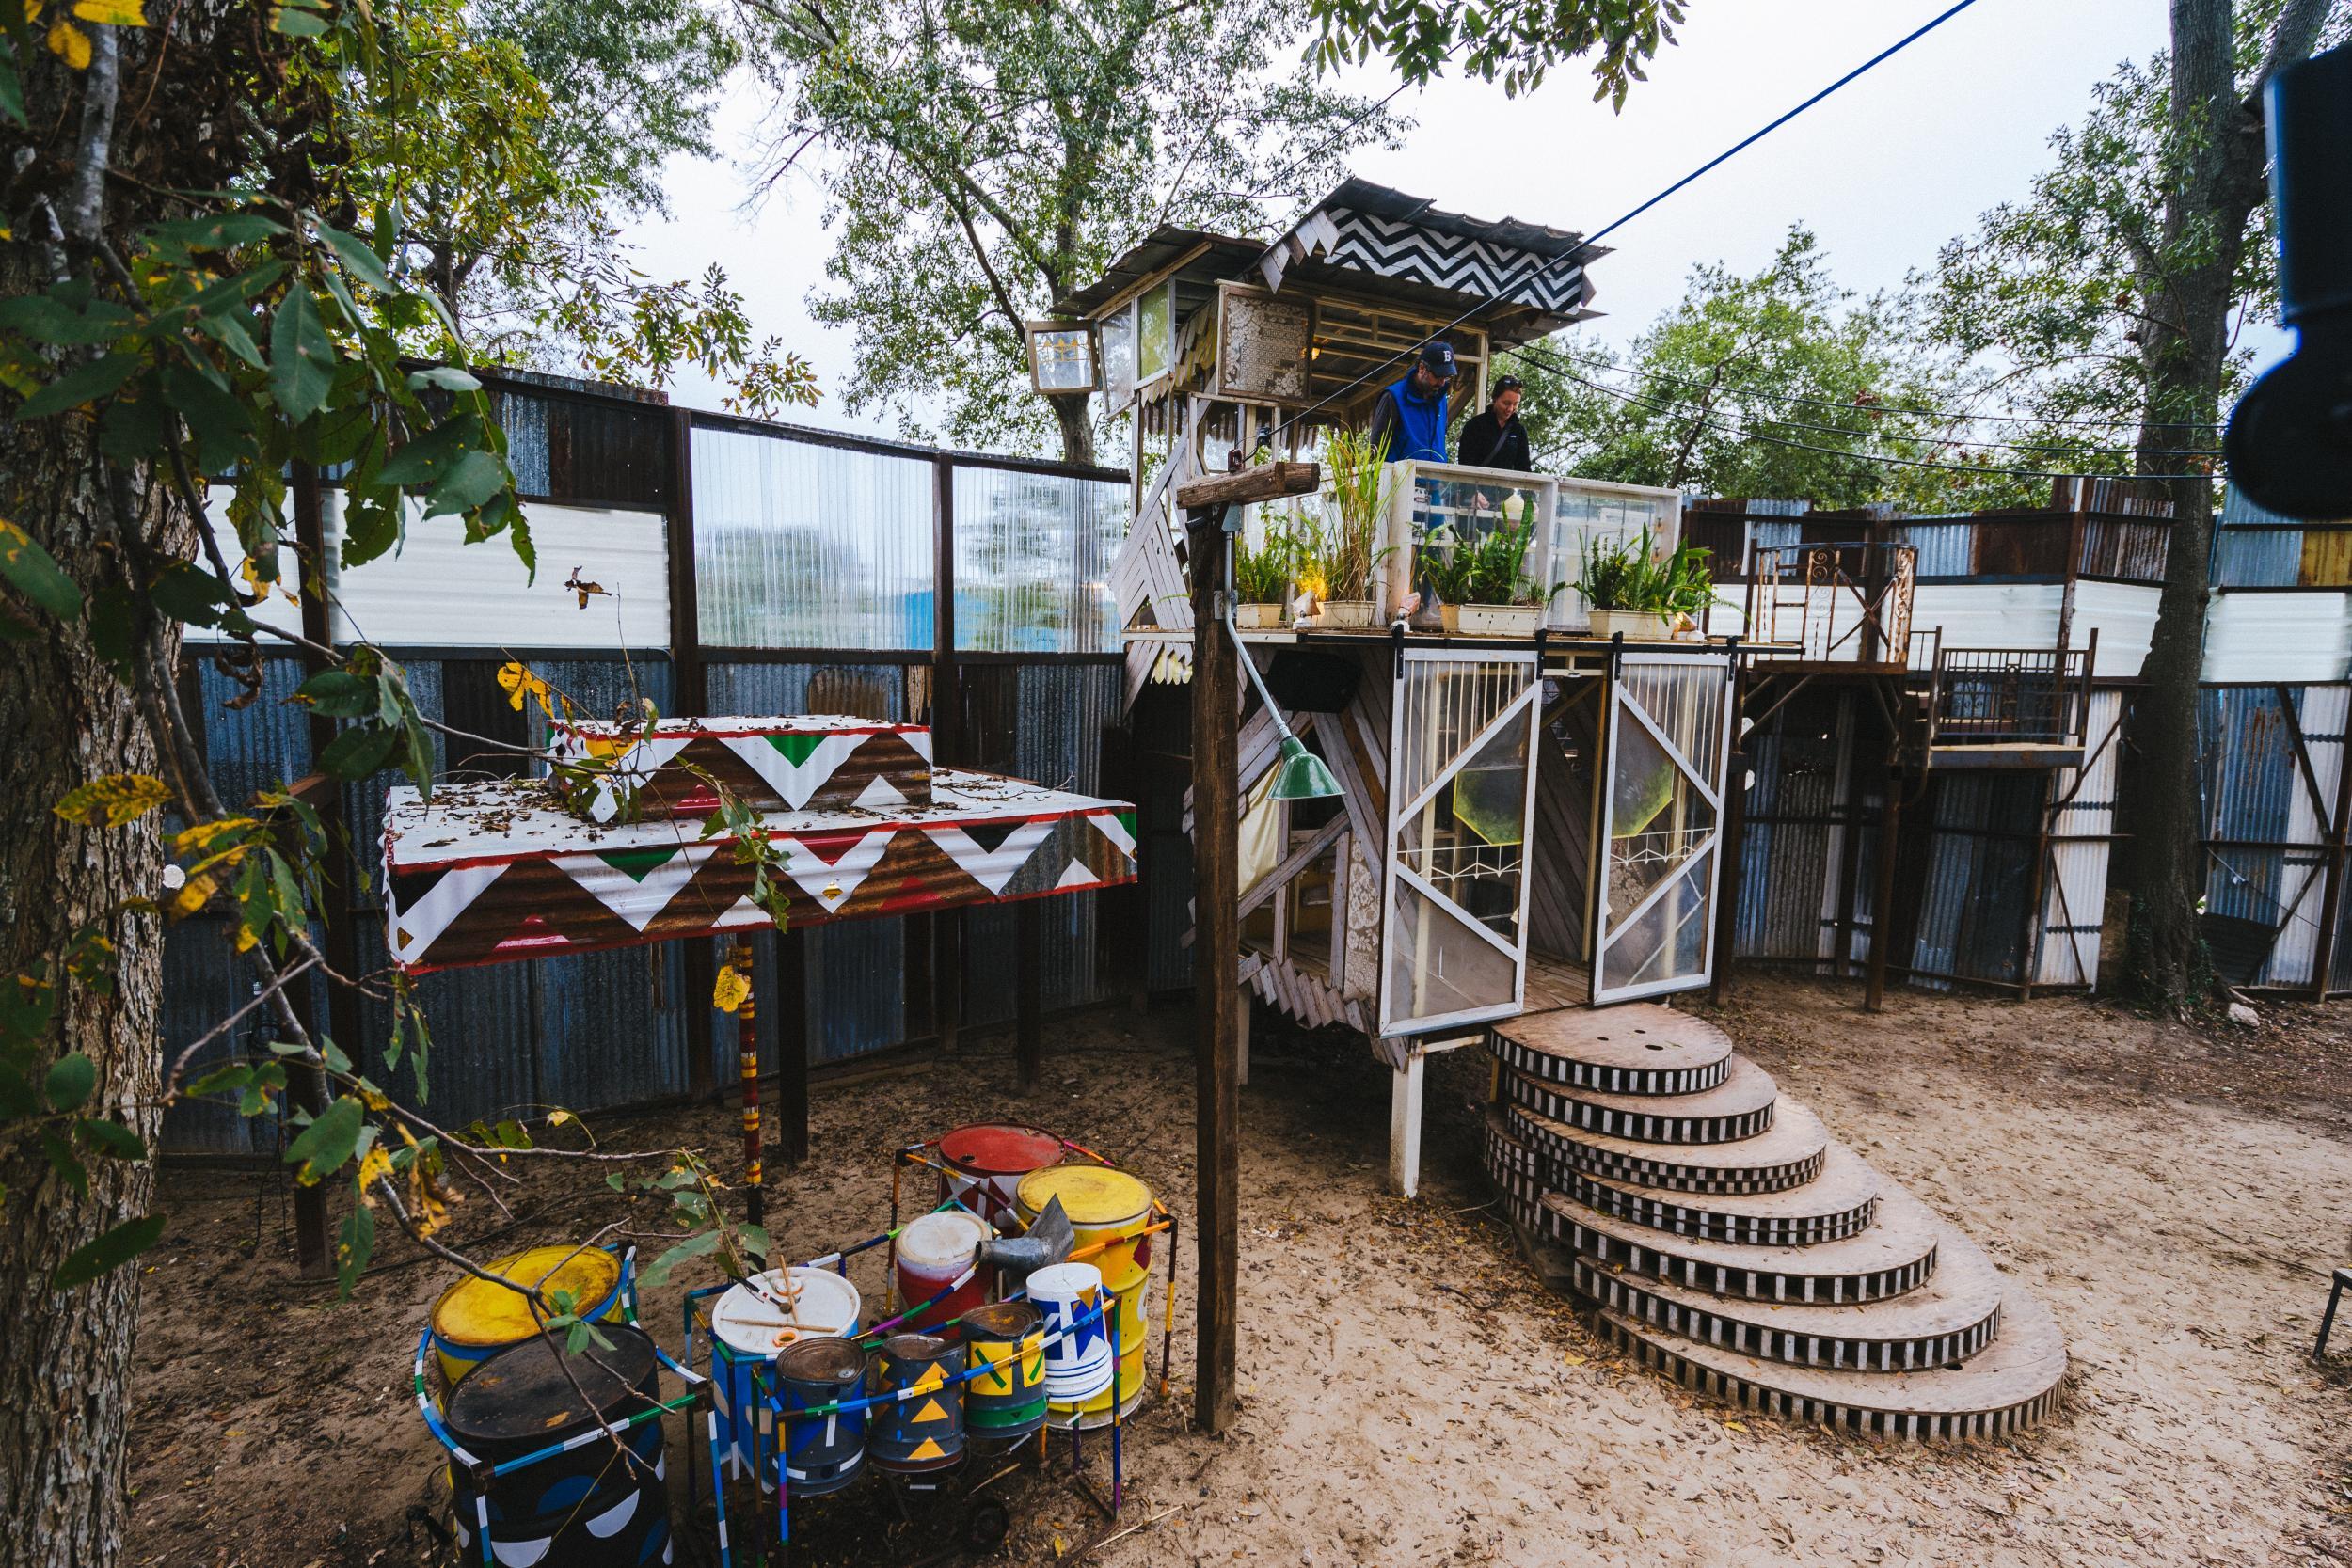 Explore the musical treehouses at Music Box Village